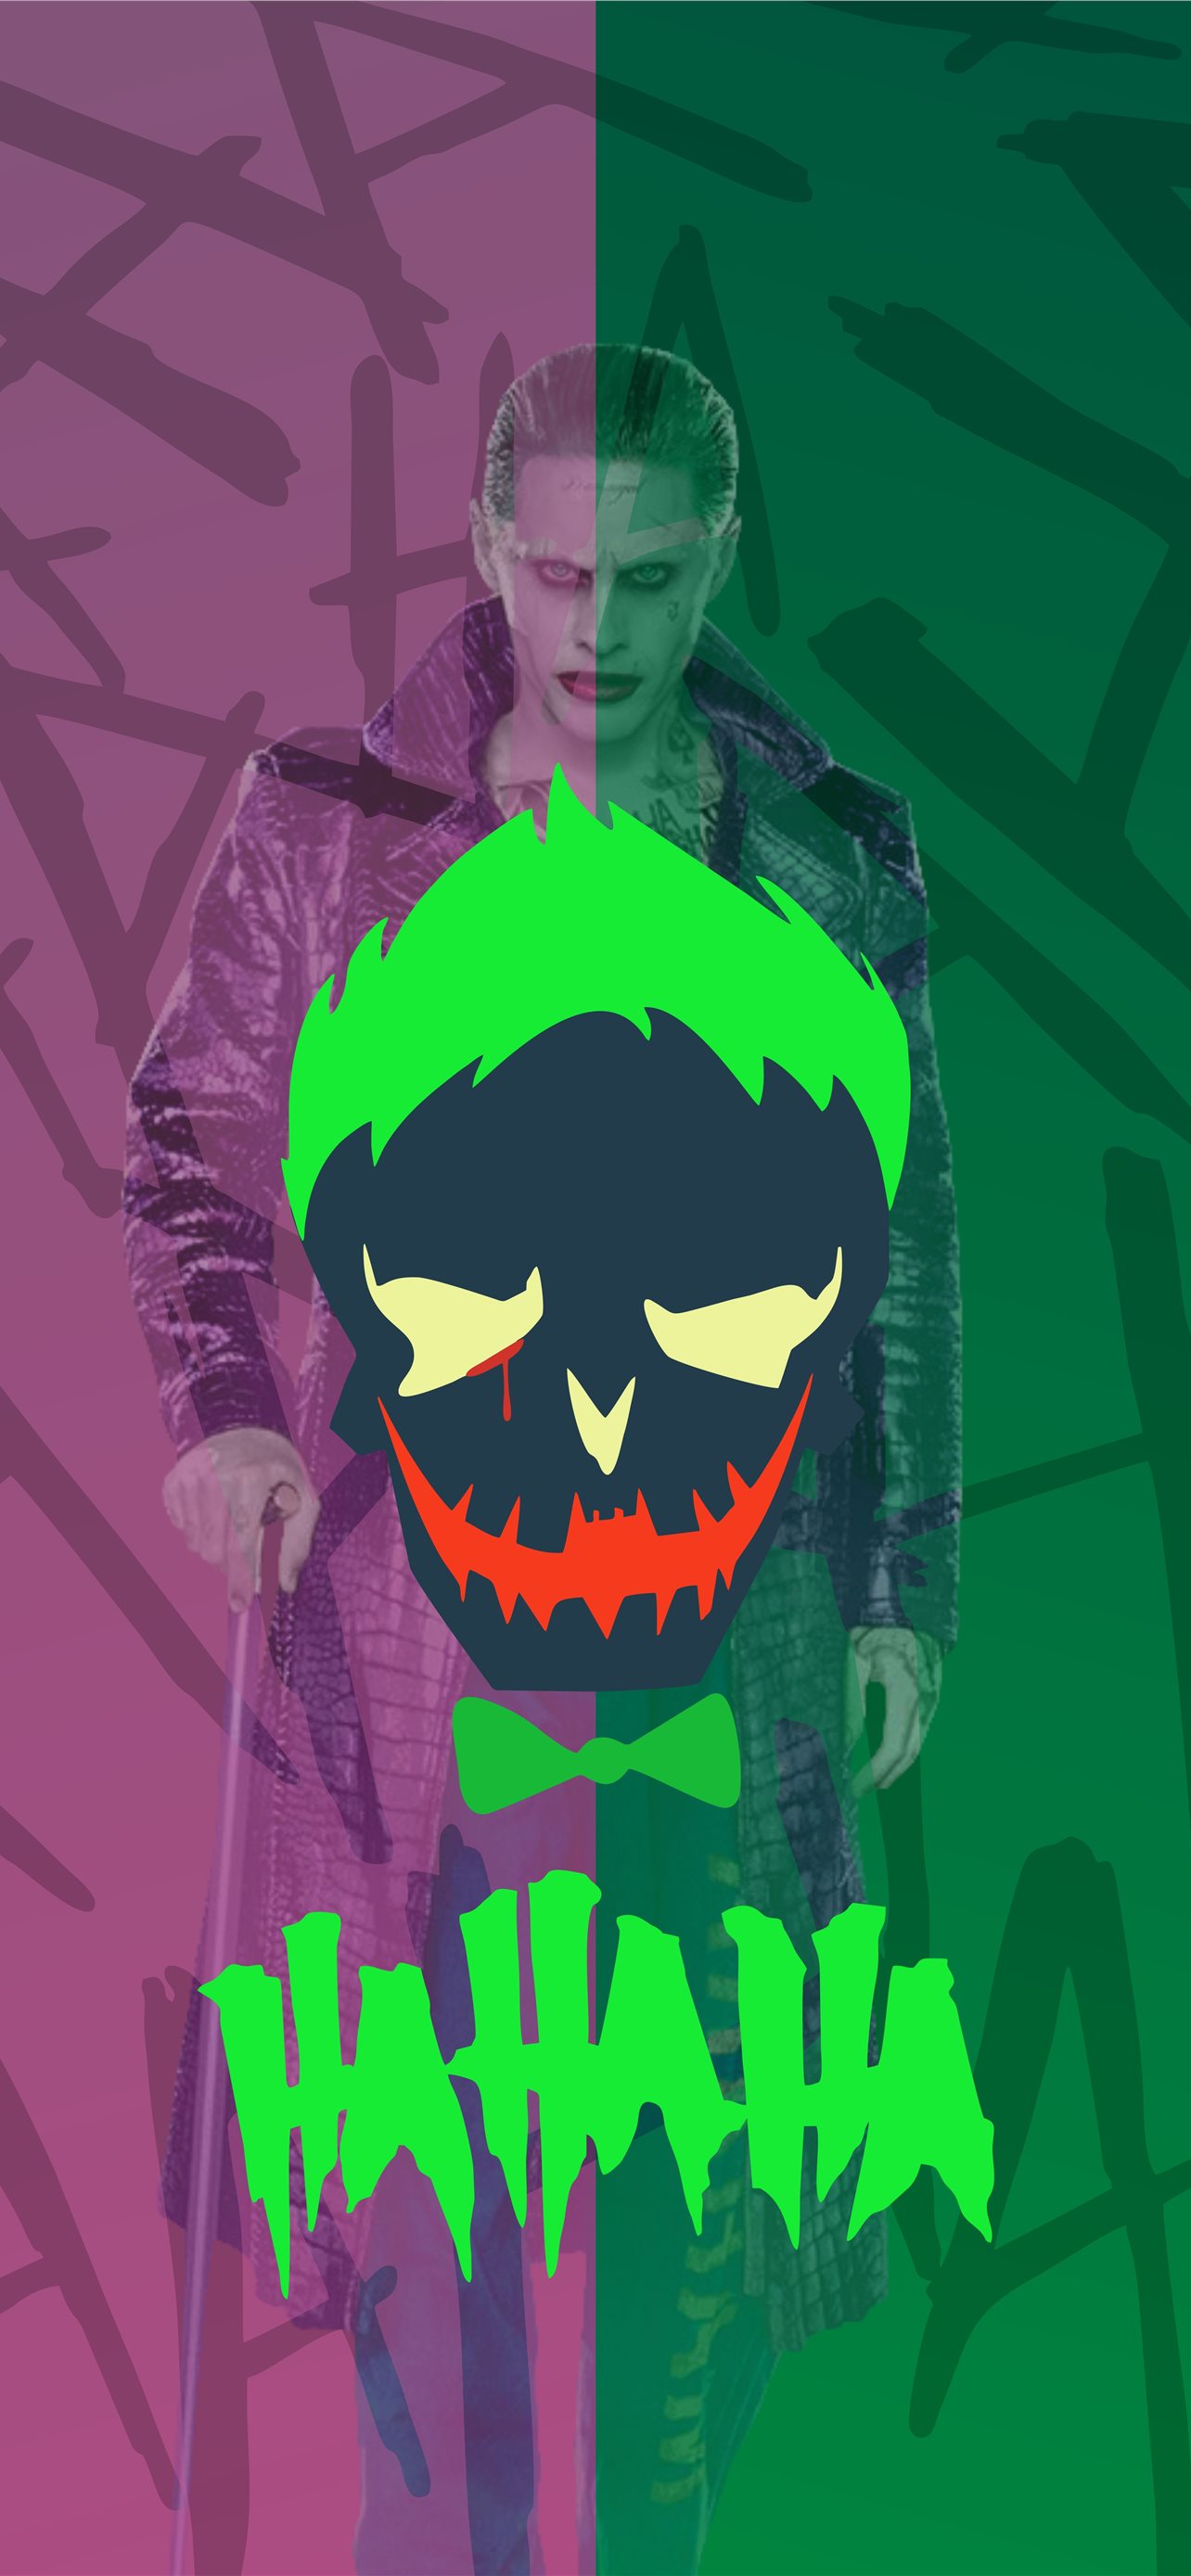 The Suicide Squad Wallpapers